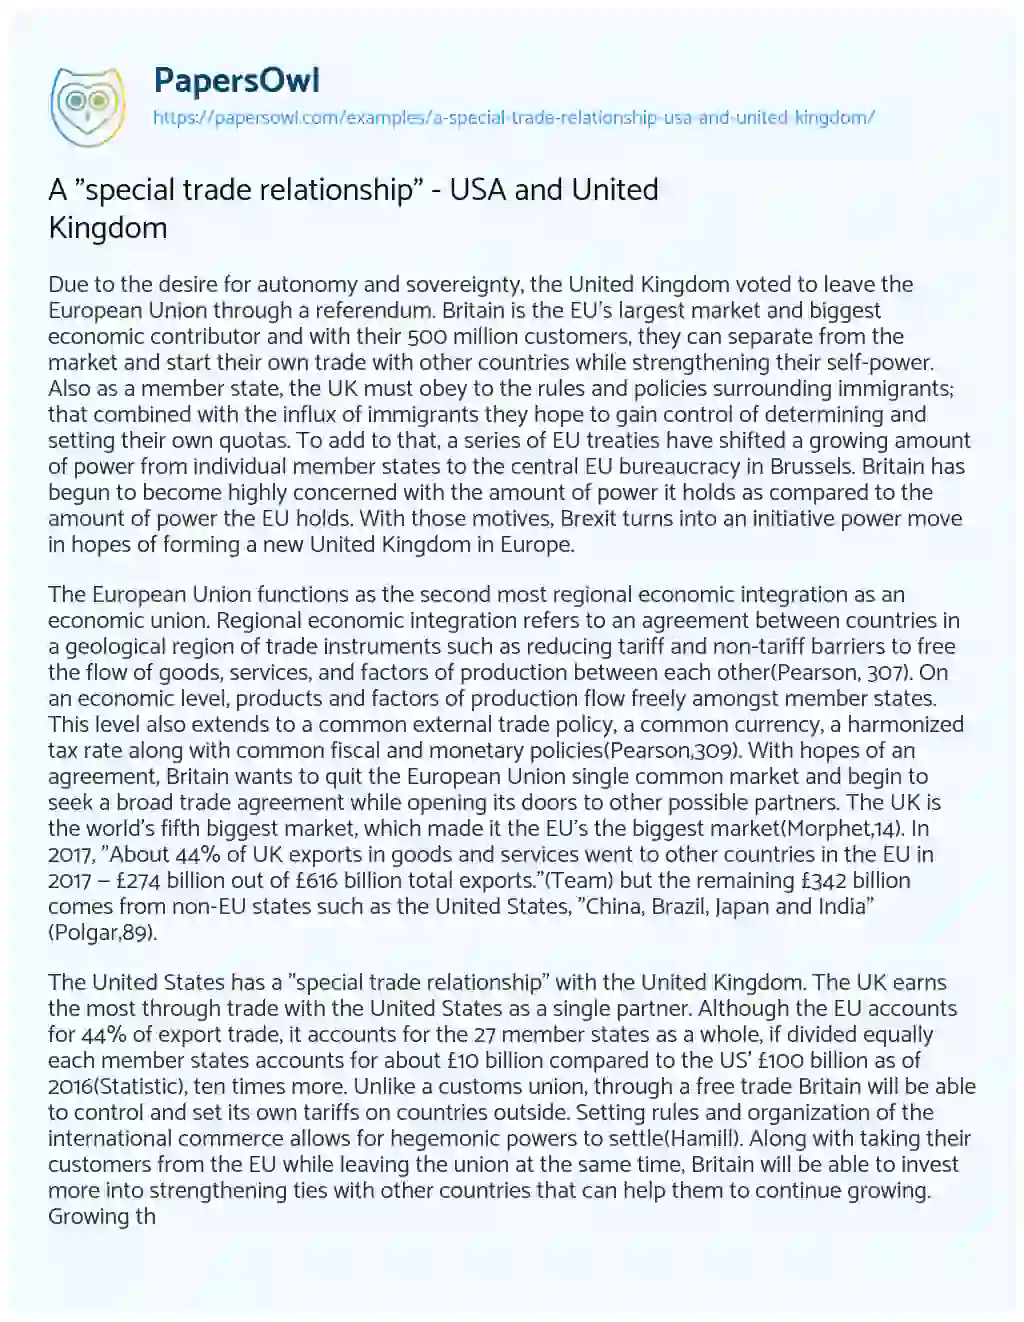 Essay on A “special Trade Relationship” – USA and United Kingdom